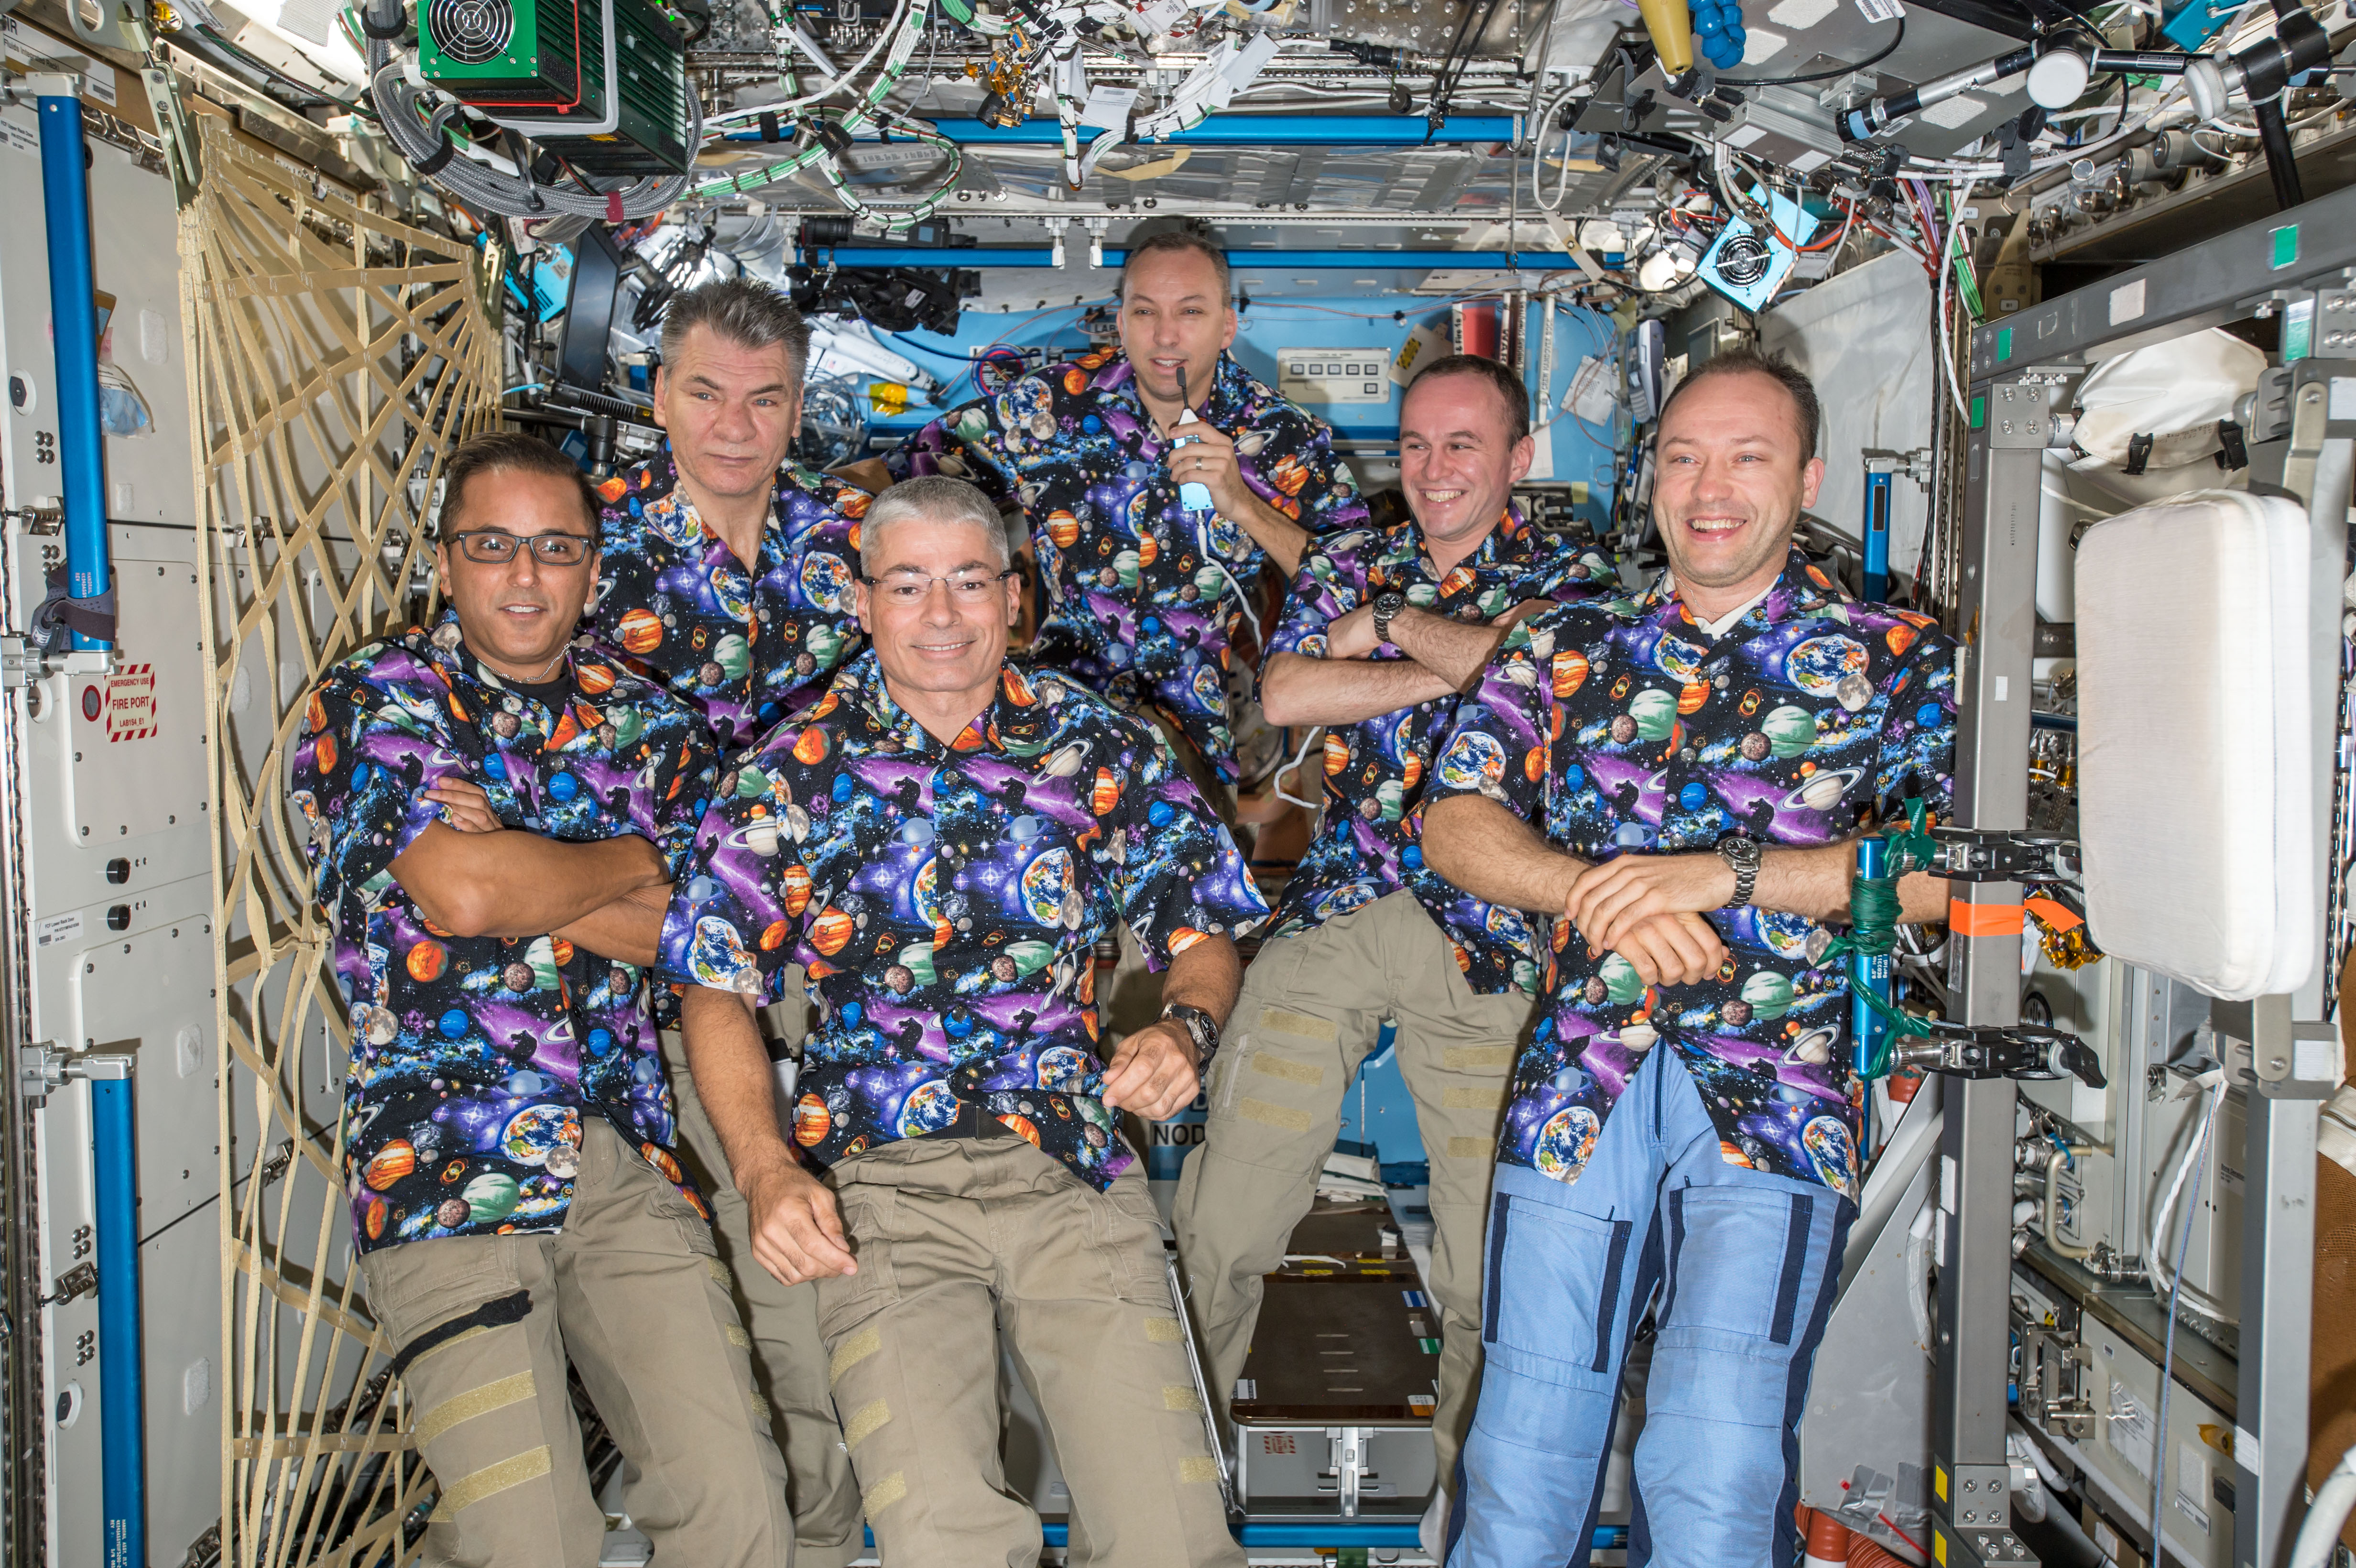 Expedition 53 inflight crew portrait in the Destiny lab